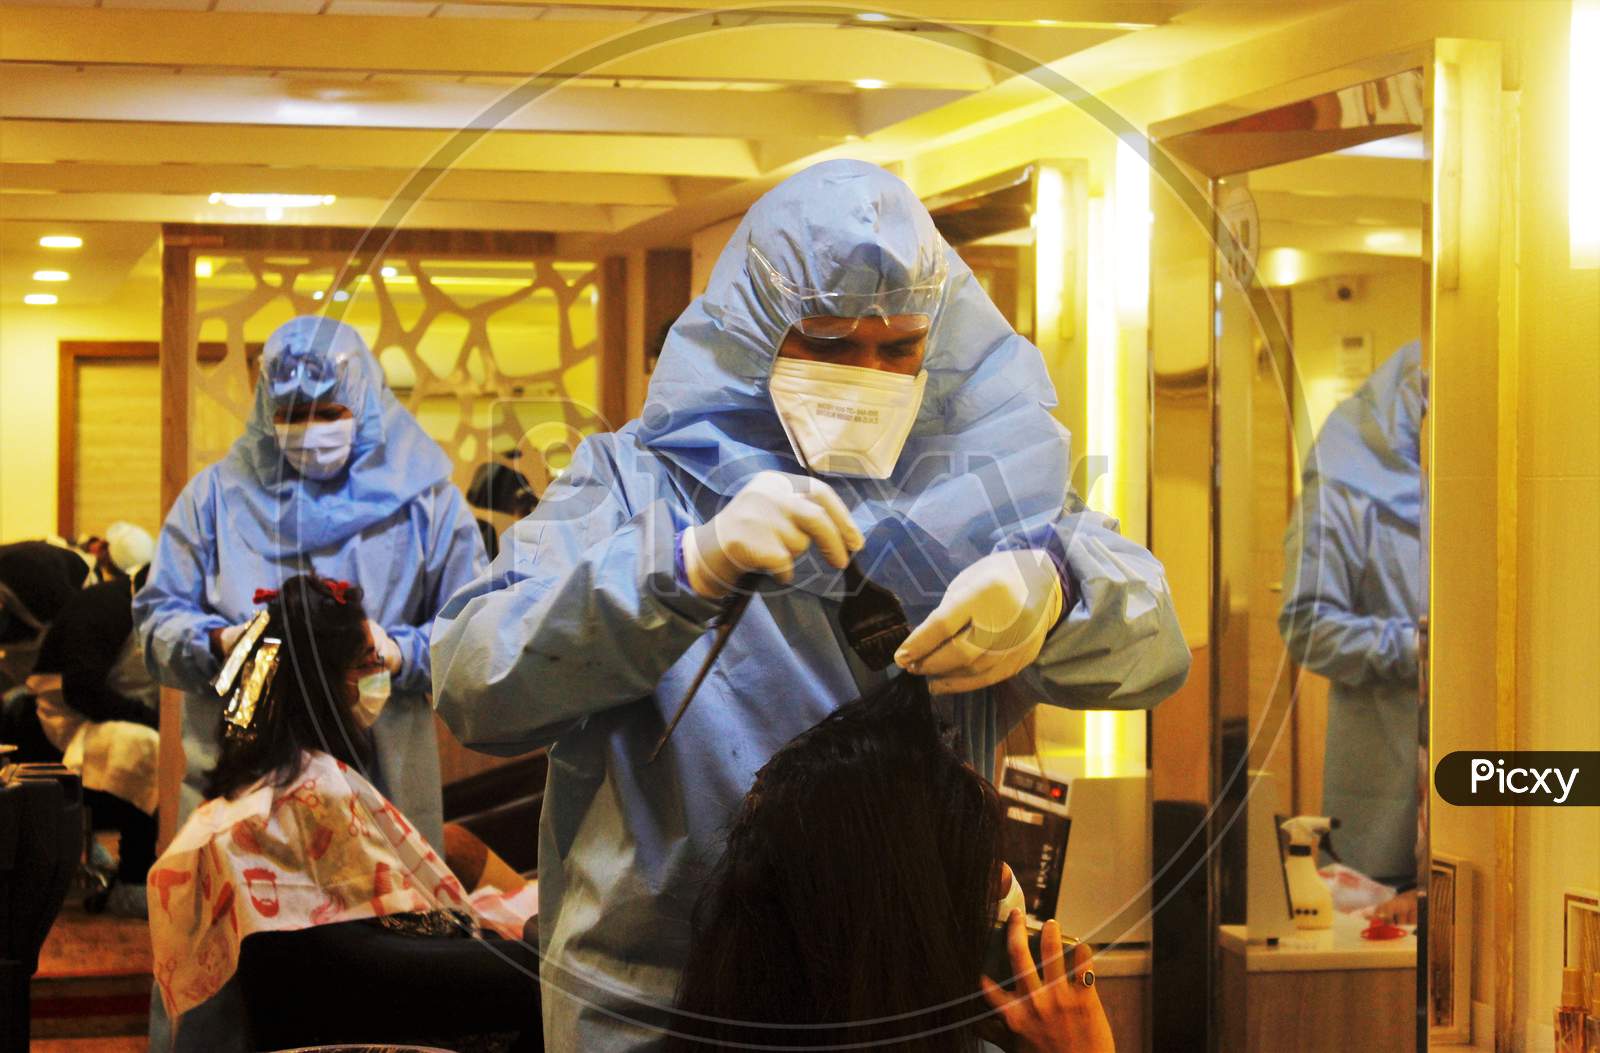 Hair stylists wearing protective gear attend to a customer with face masks at a salon in Mumbai, India, on June 29, 2020.